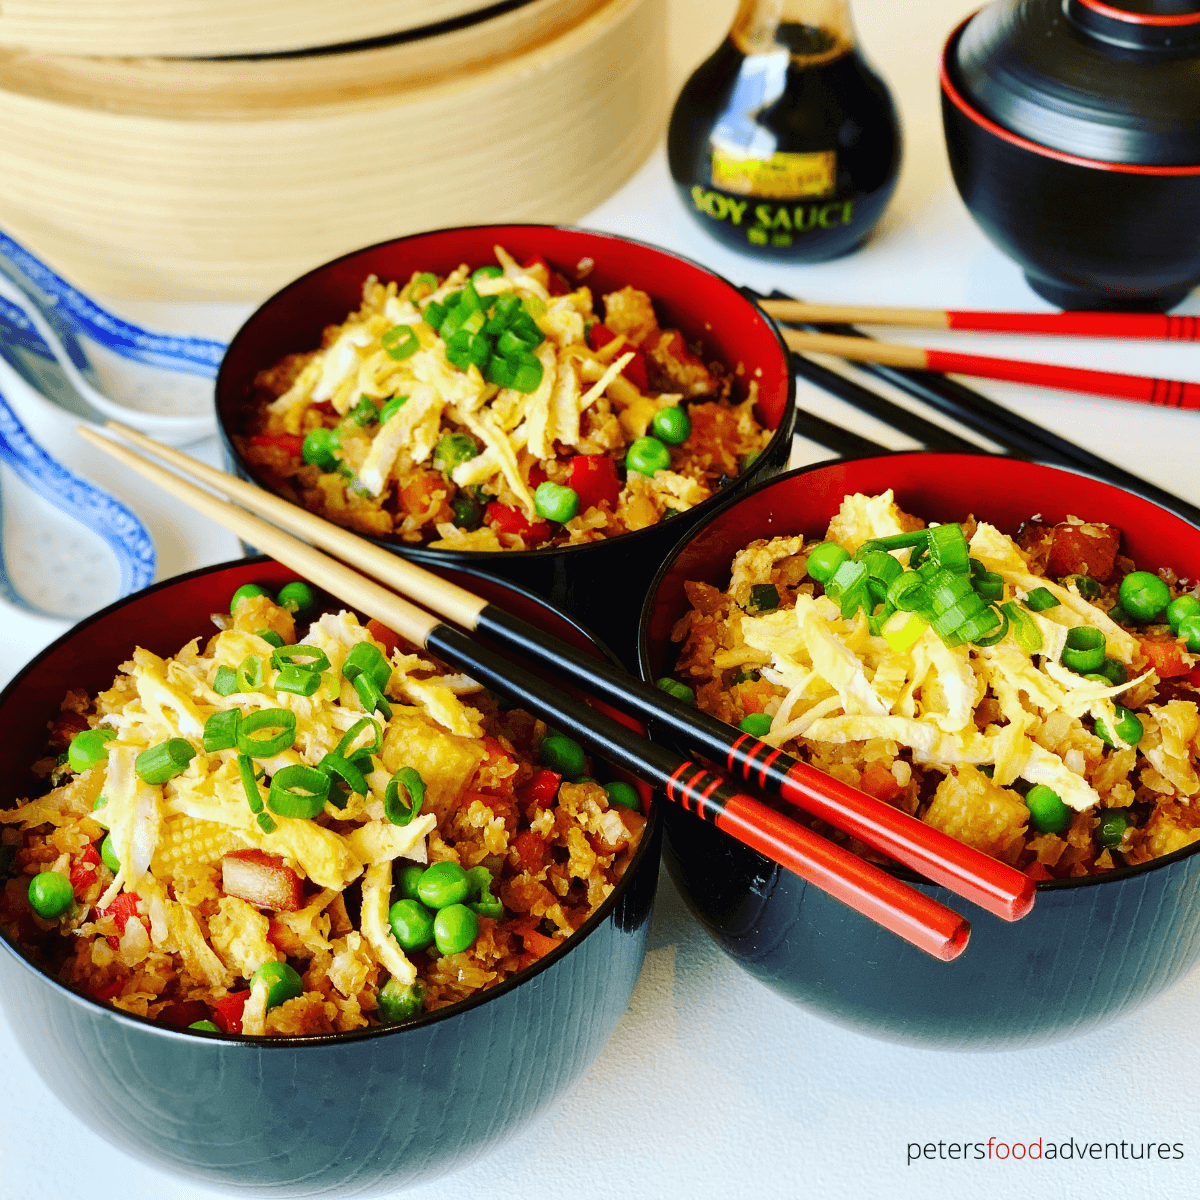 Cauliflower Fried Rice recipe is low carb, keto and delicious. An easy way to sneak in vegetables to your dinner plate. Perfect as a side dish, or as your dinner main. Packed with classic fried rice vegetables like red peppers, peas, carrot and baby corn.